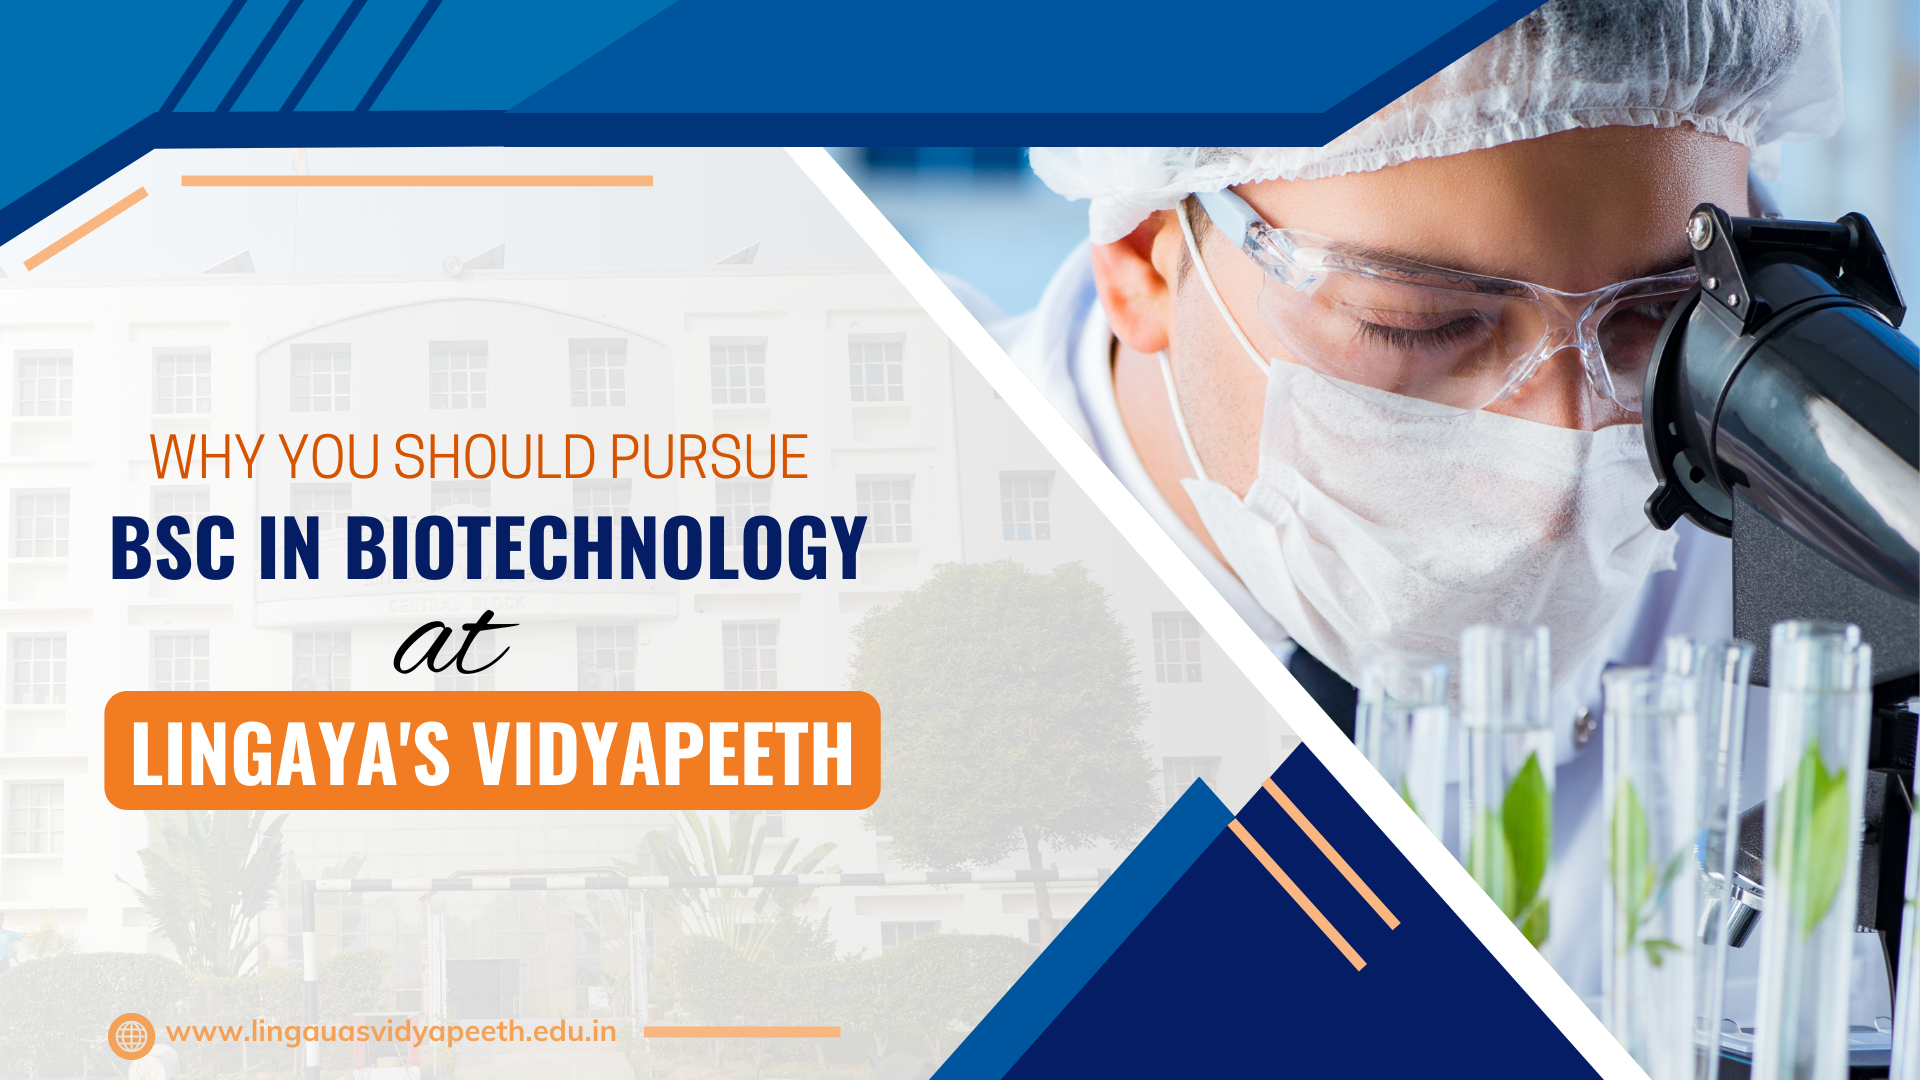 Why You Should Pursue a BSc in Biotechnology at Lingaya’s Vidyapeeth?